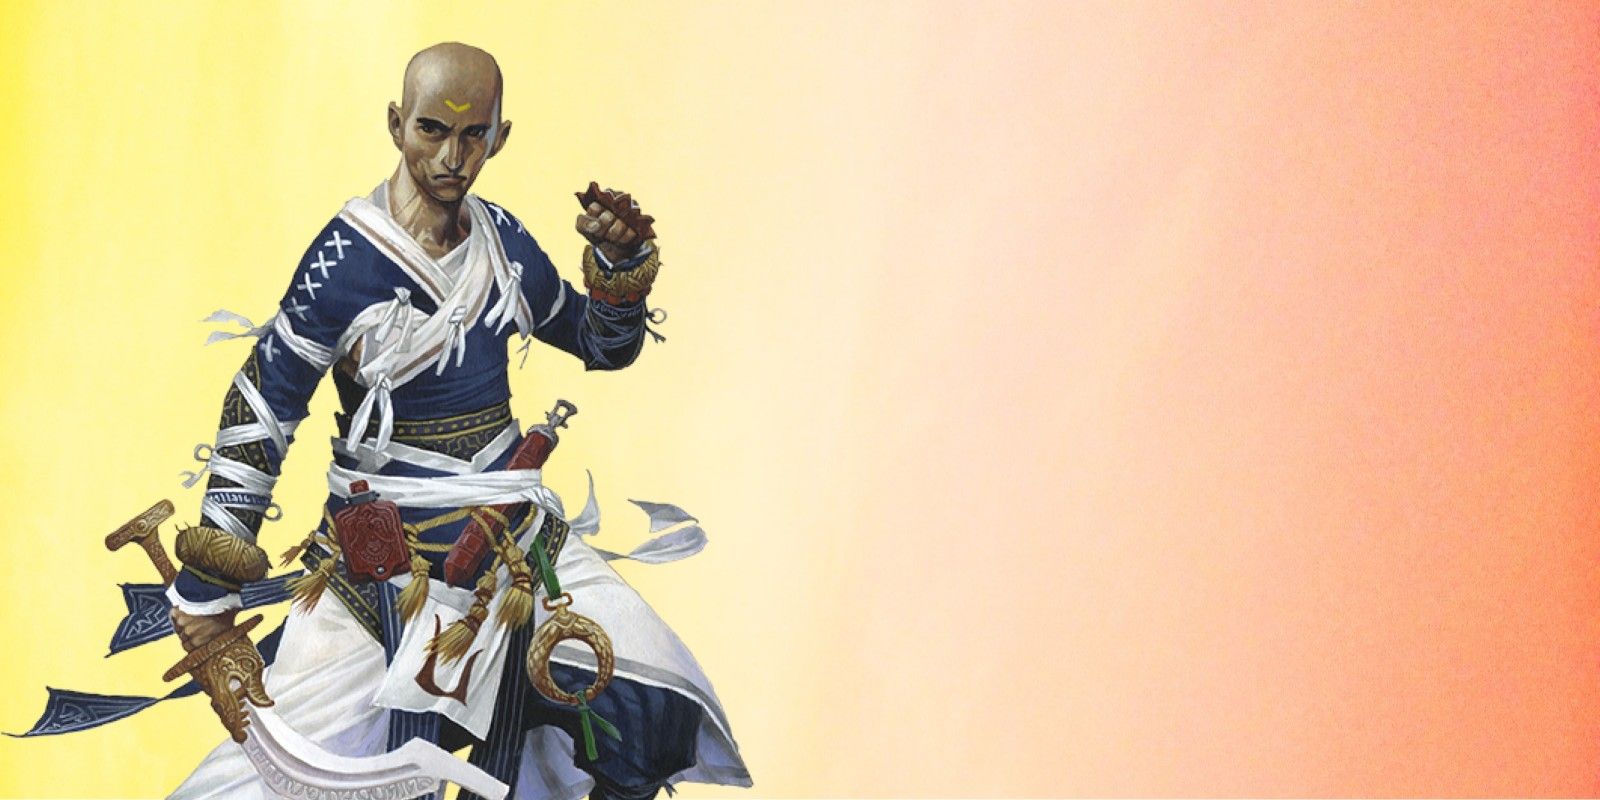 The Monk holding his sword and raising his fist in a battle stance